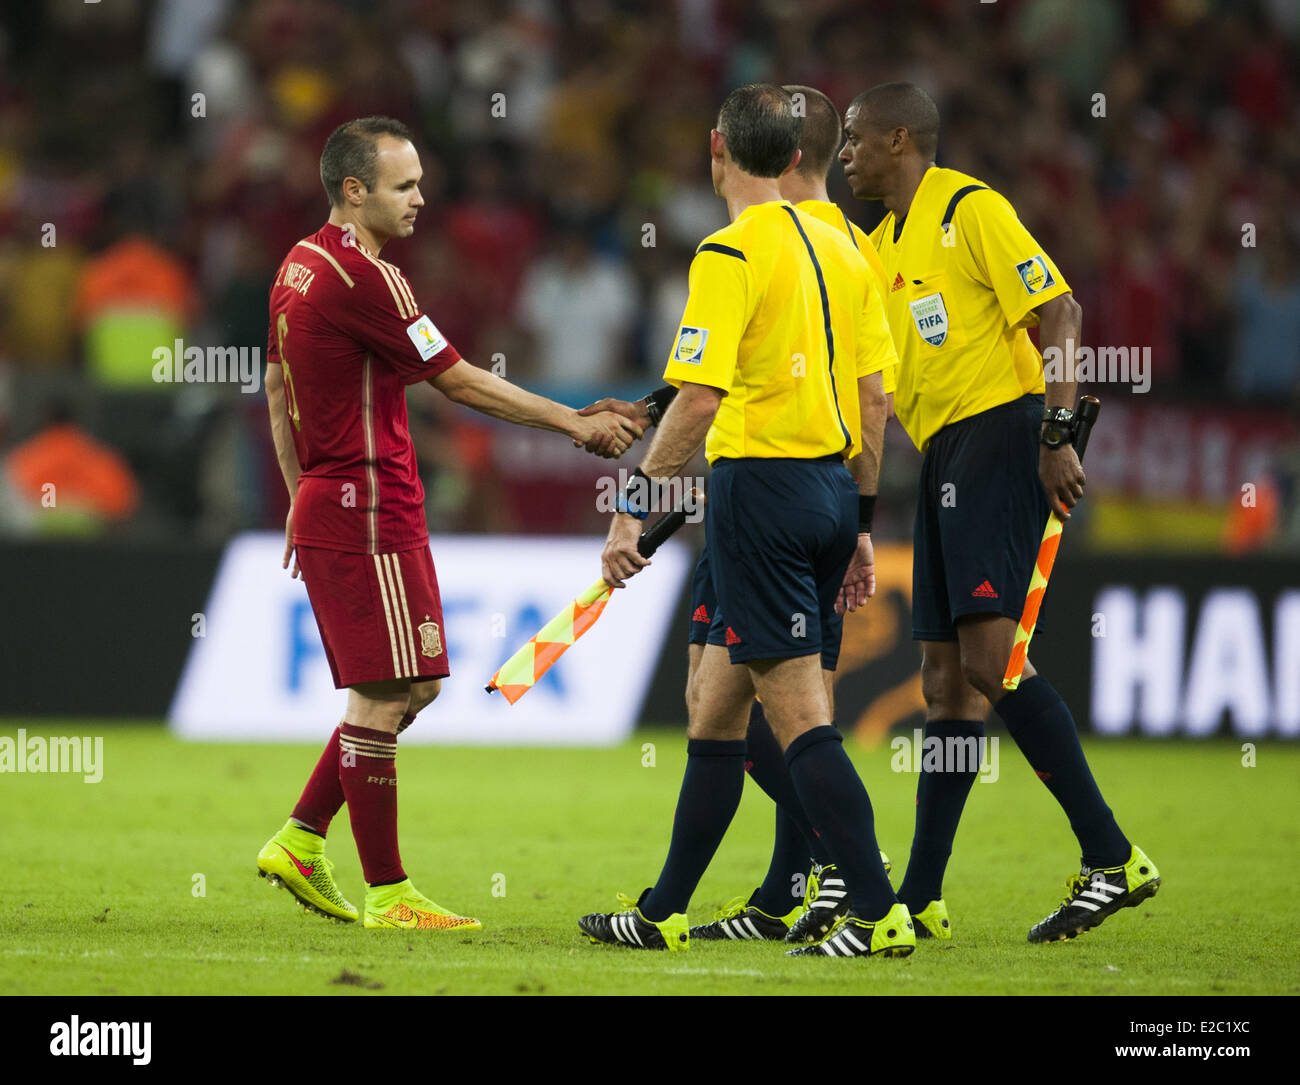 Porto Alegre, Brazil. 19th June, 2014.  Andres Iniesta in the match between Spain and Chile in the group stage of the 2014 World Cup, for the group B match at the Beira Rio stadium, on June 18, 2014  Credit:  Urbanandsport/NurPhoto/ZUMAPRESS.com/Alamy Live News Stock Photo